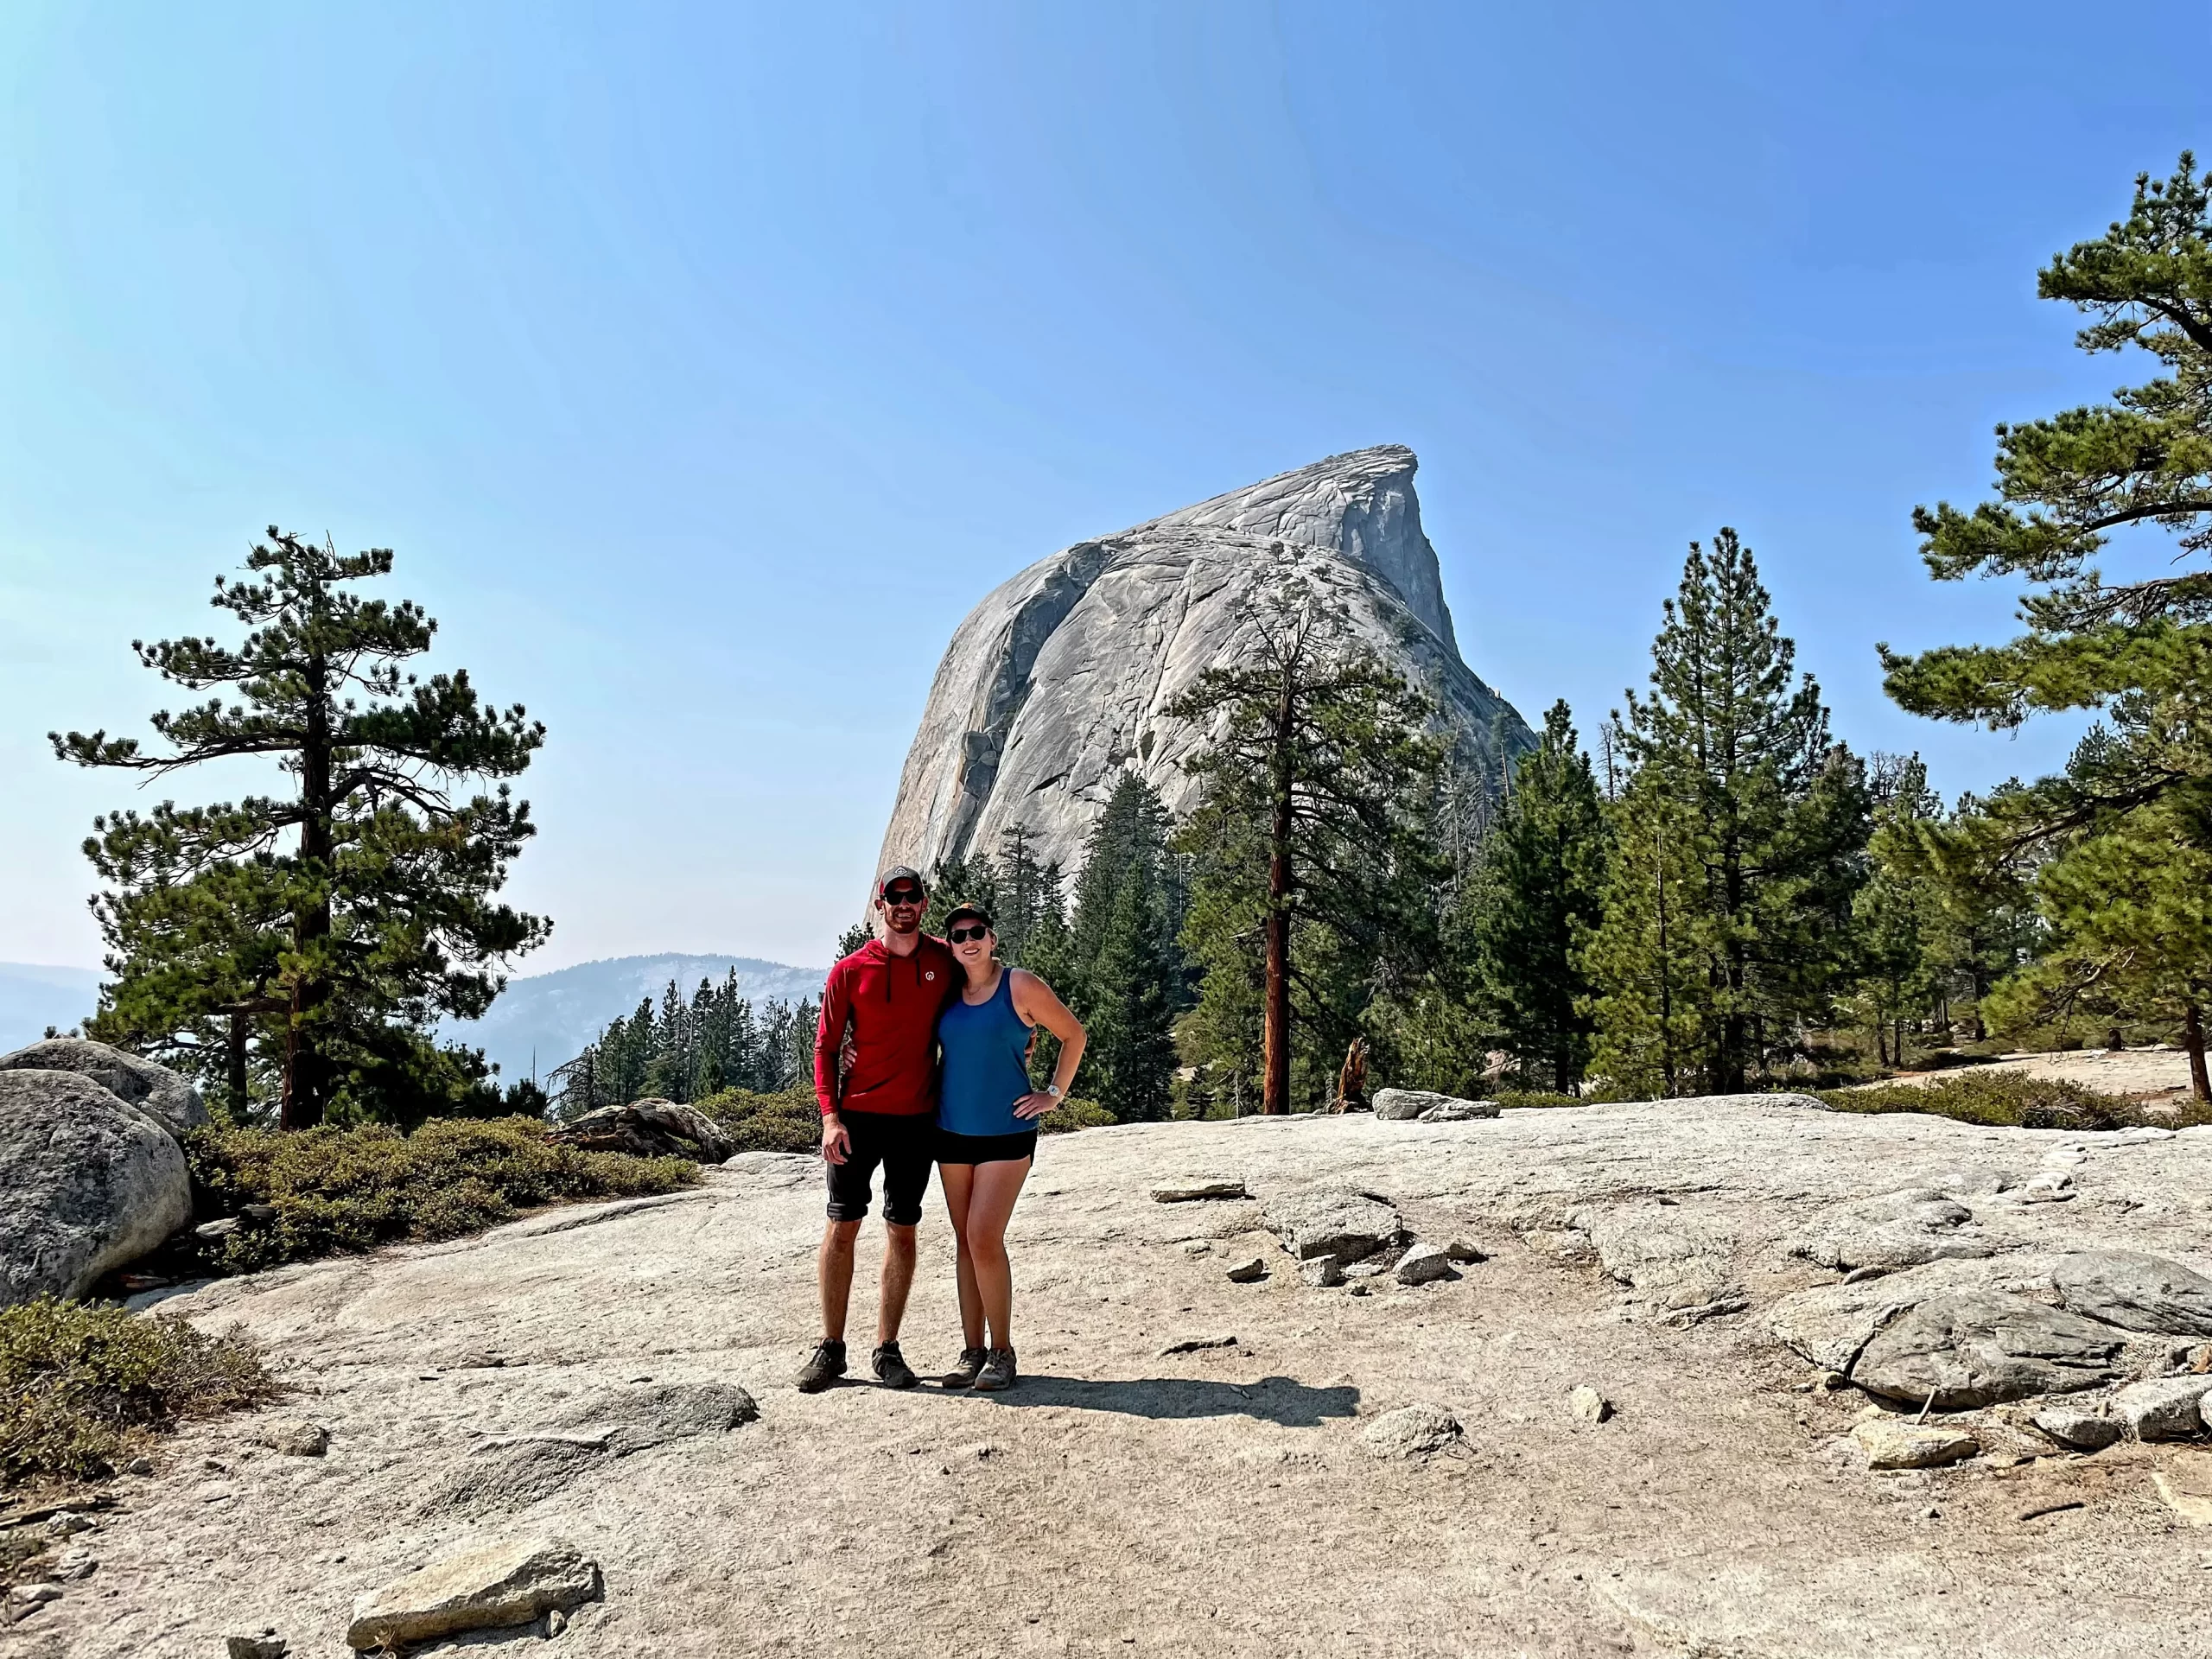 Andrea Moritz and her significant other standing on a rocky mountain